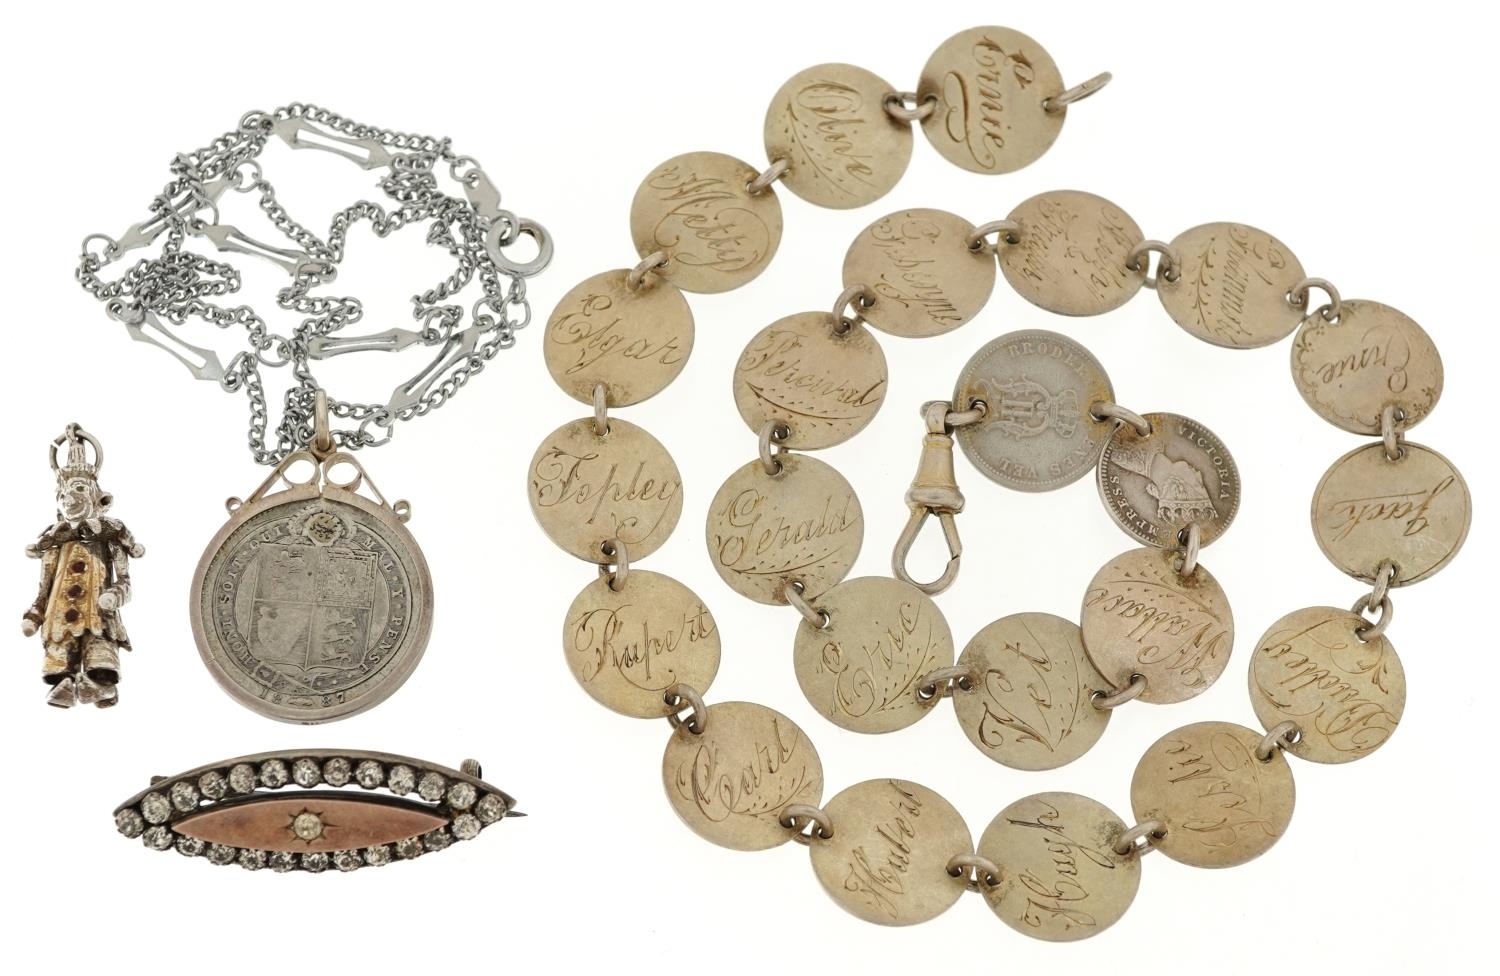 Antique and later silver jewellery including a Victorian coin necklace, articulated clown pendant